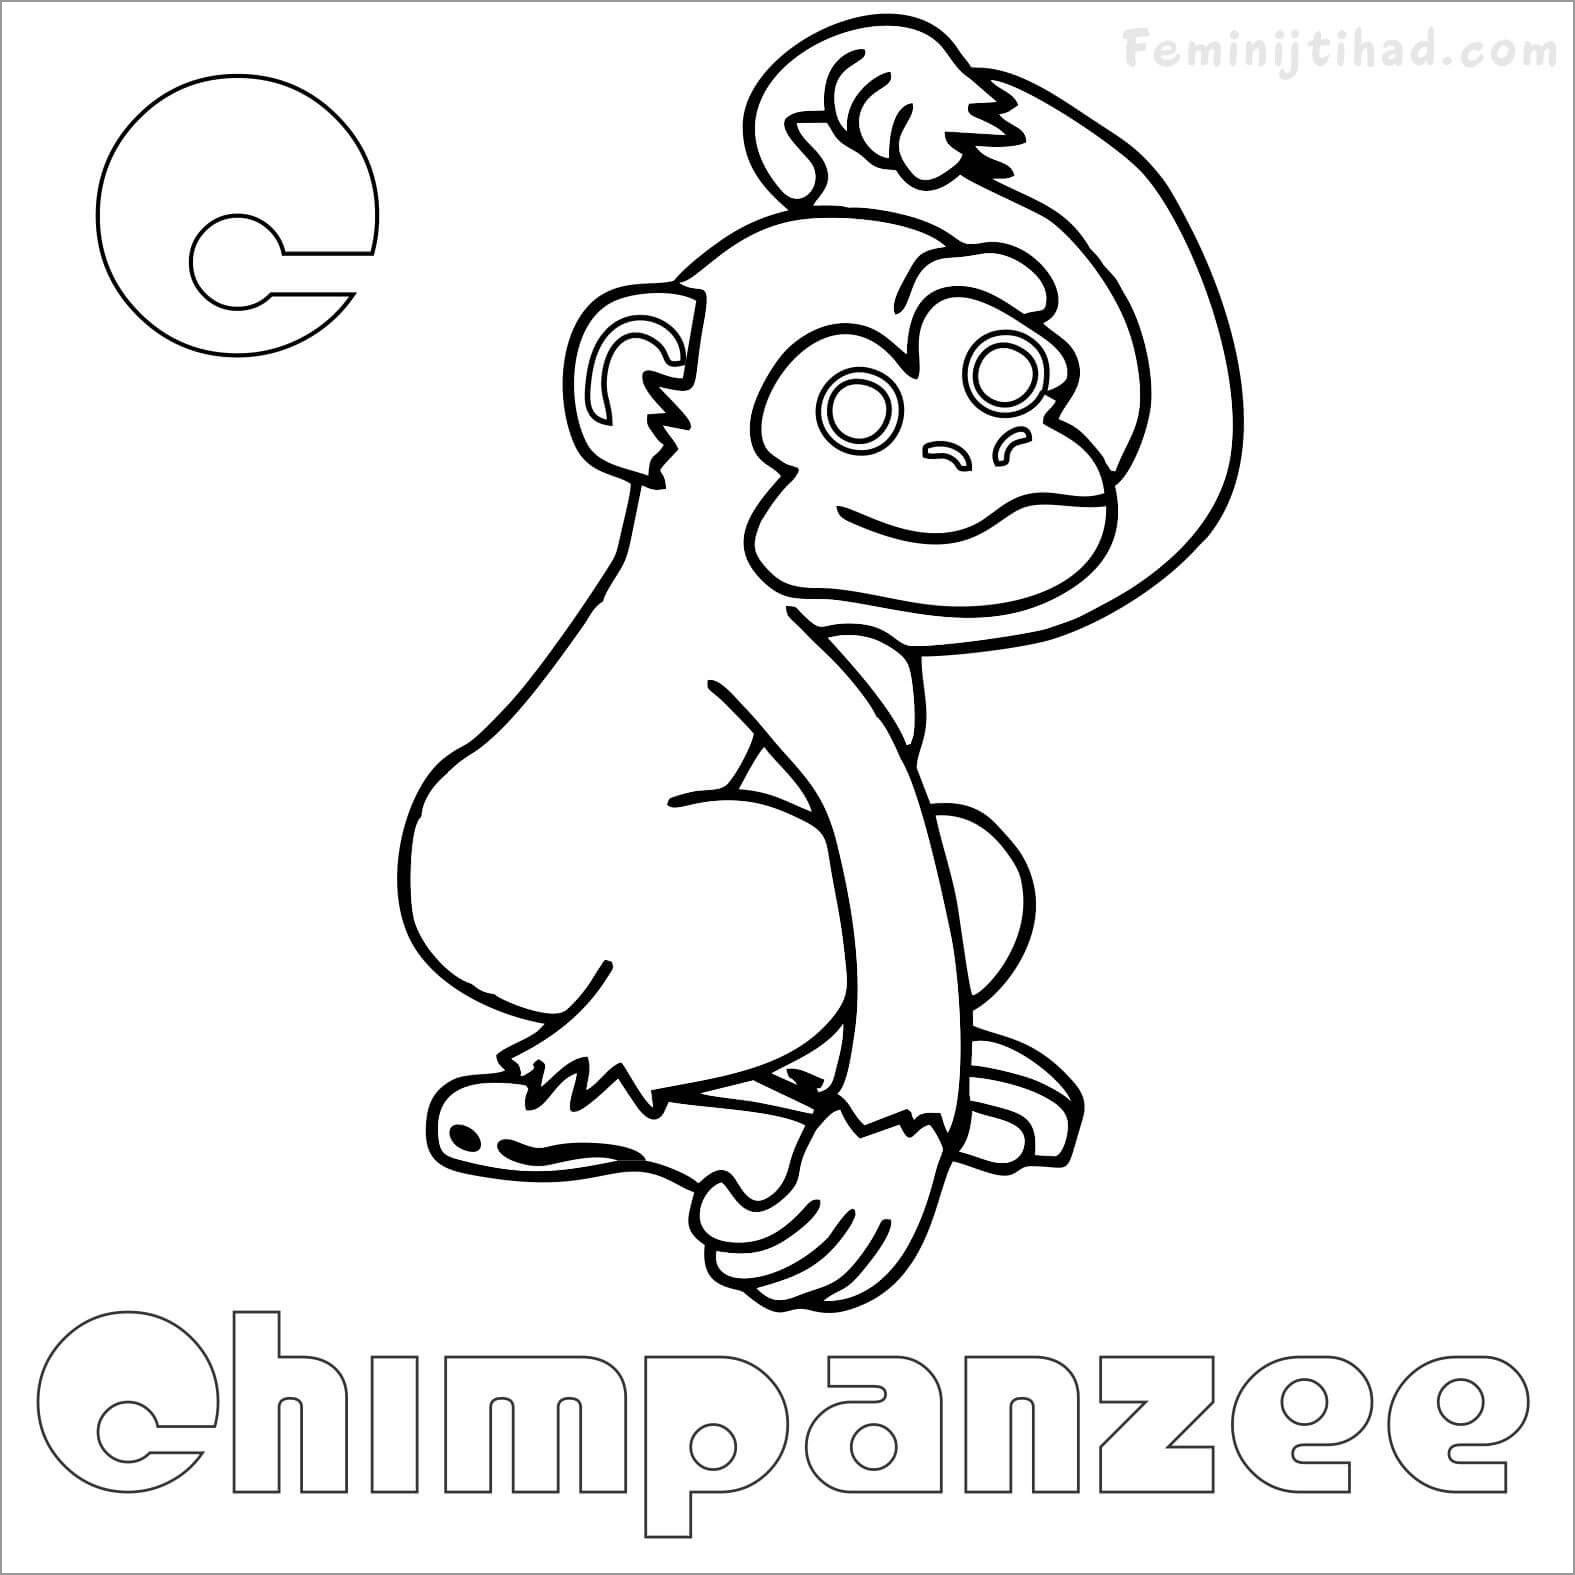 C for Chimpanzee Coloring Page